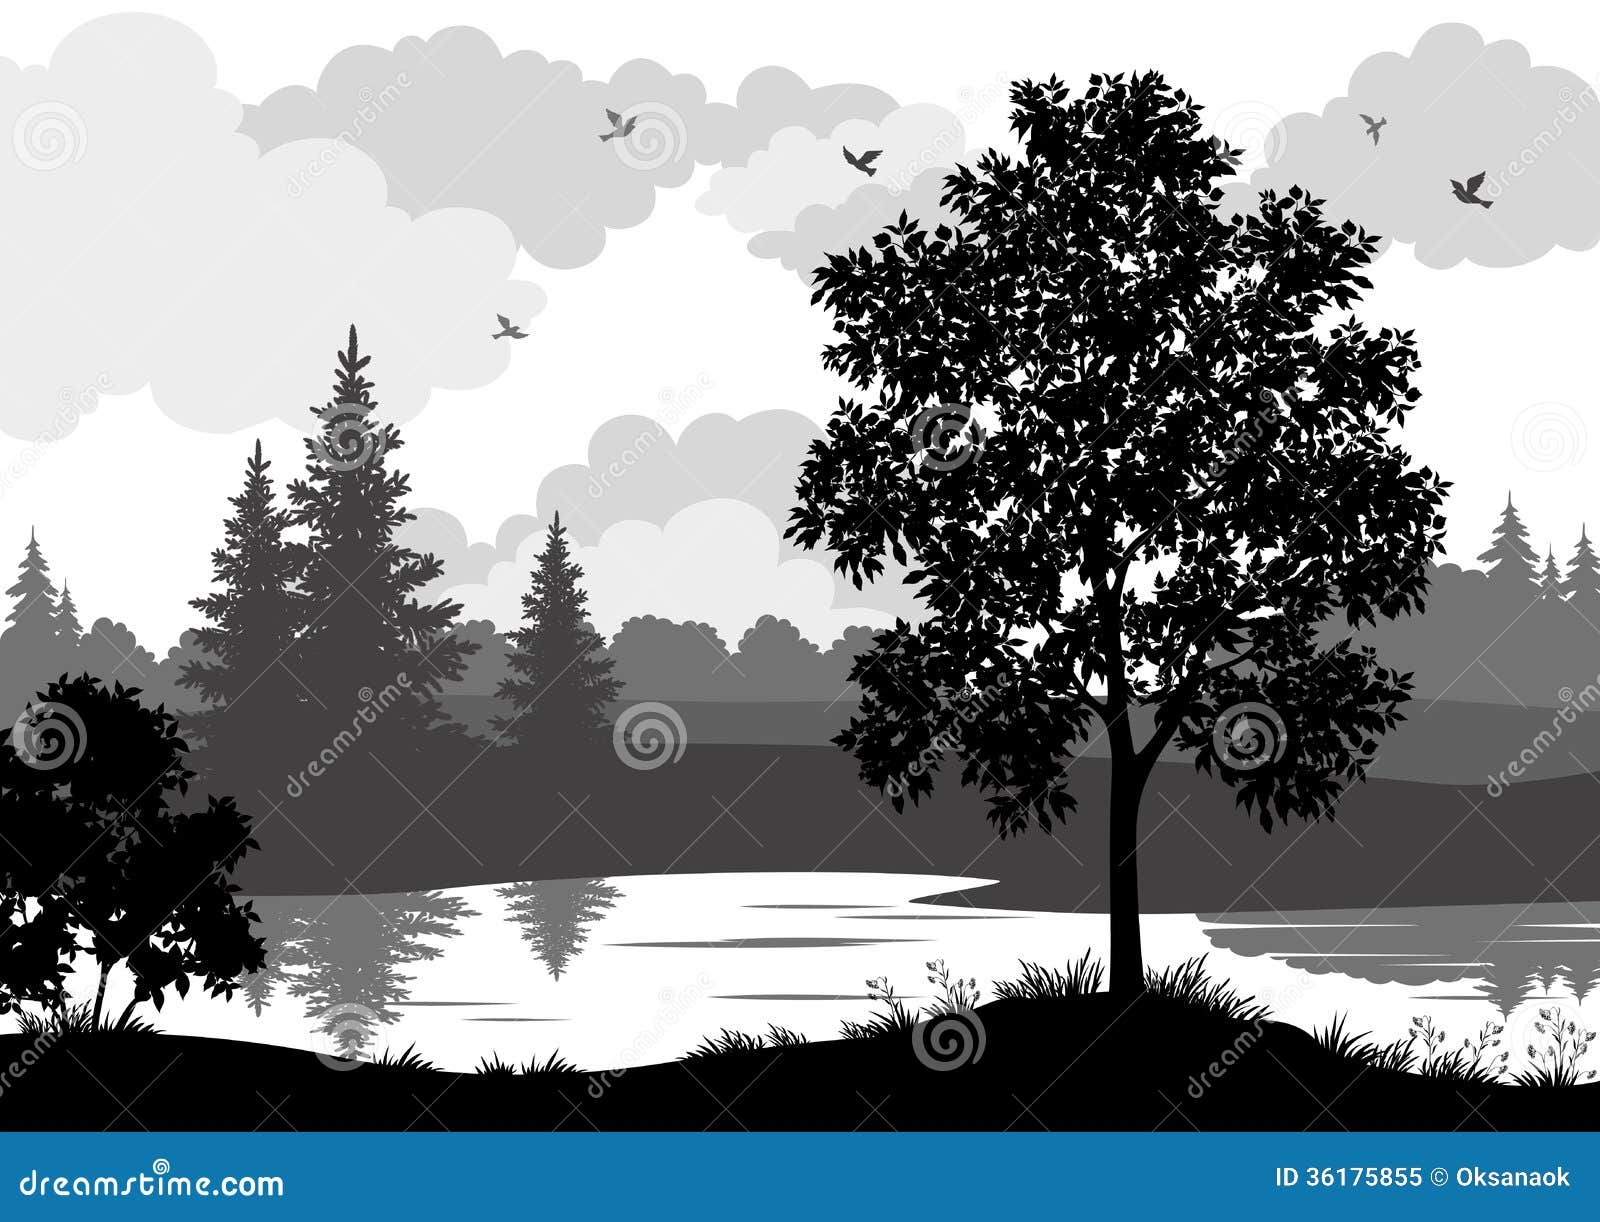 Landscape, Trees, River And Birds Silhouette Royalty Free Stock Photo ...